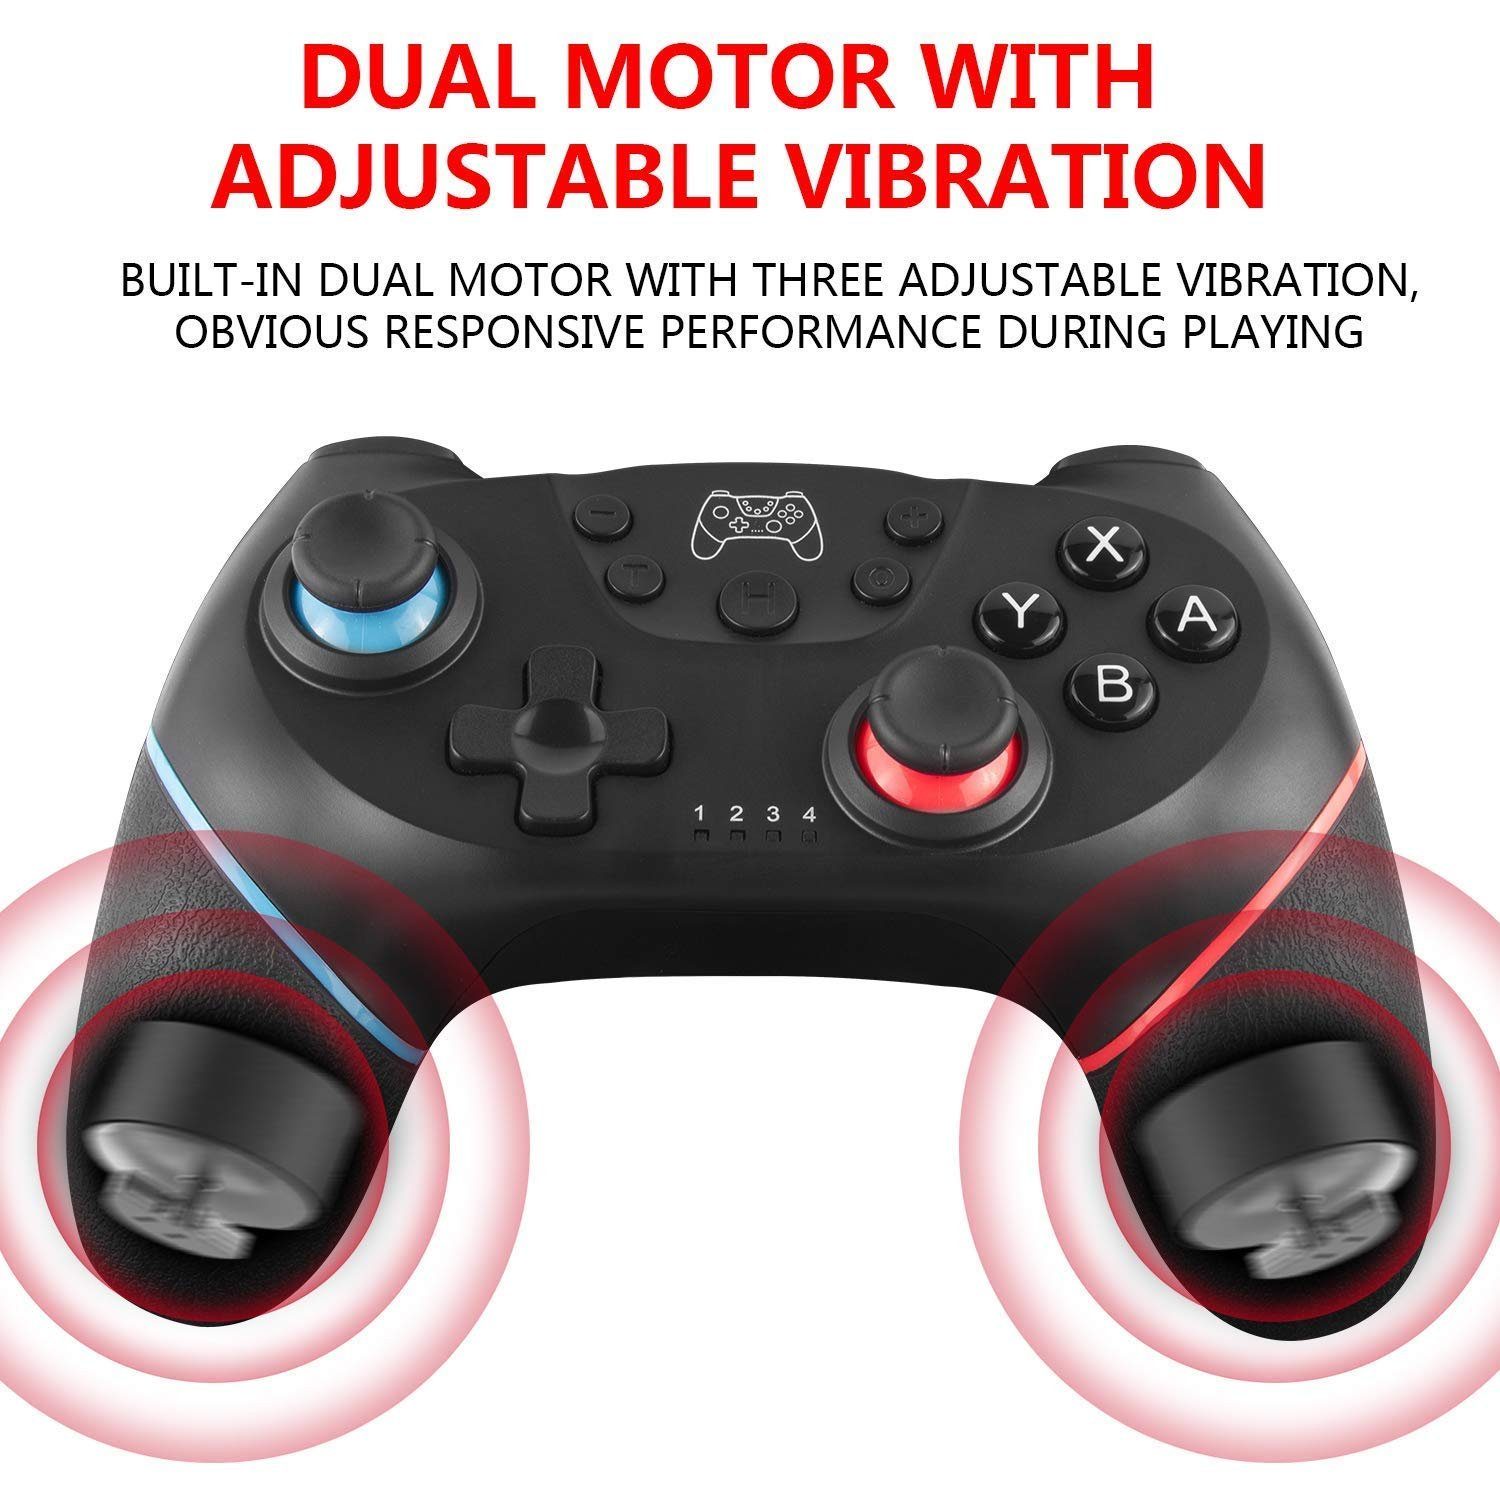 Haiaveng Turbo Pro, Achsen 6 OLED Switch Switch/Switch für Lite/Switch (Bluetooth Gamepad) Wireless Controllers Weiß, Switch-Controller Funktion